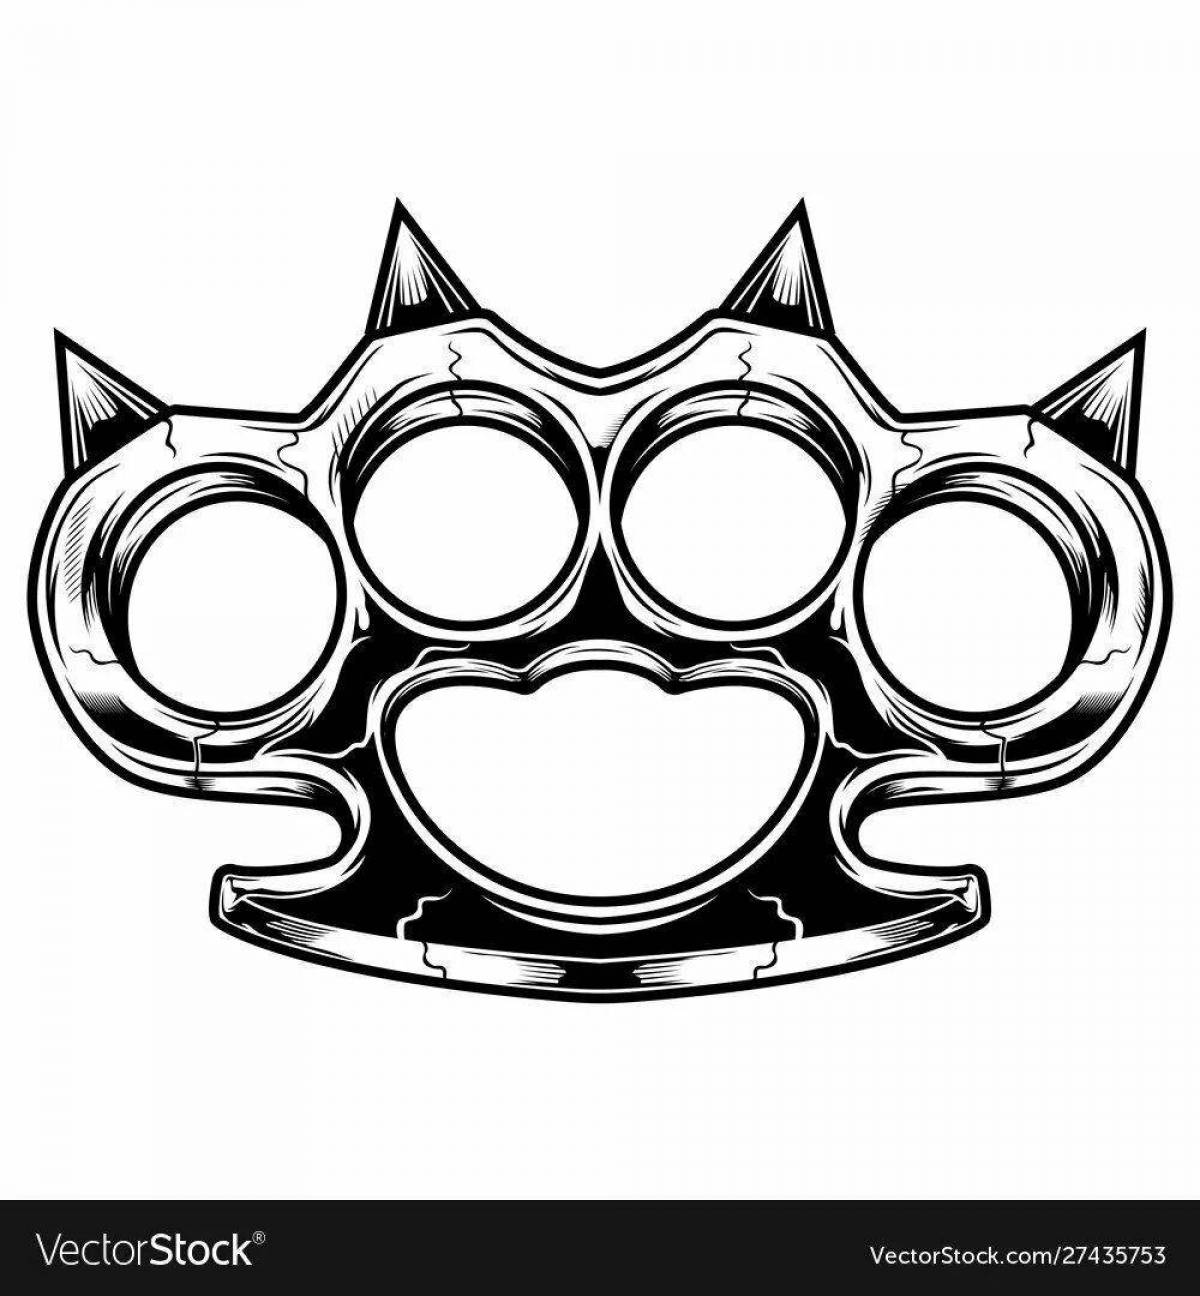 Coloring book fascinating brass knuckles